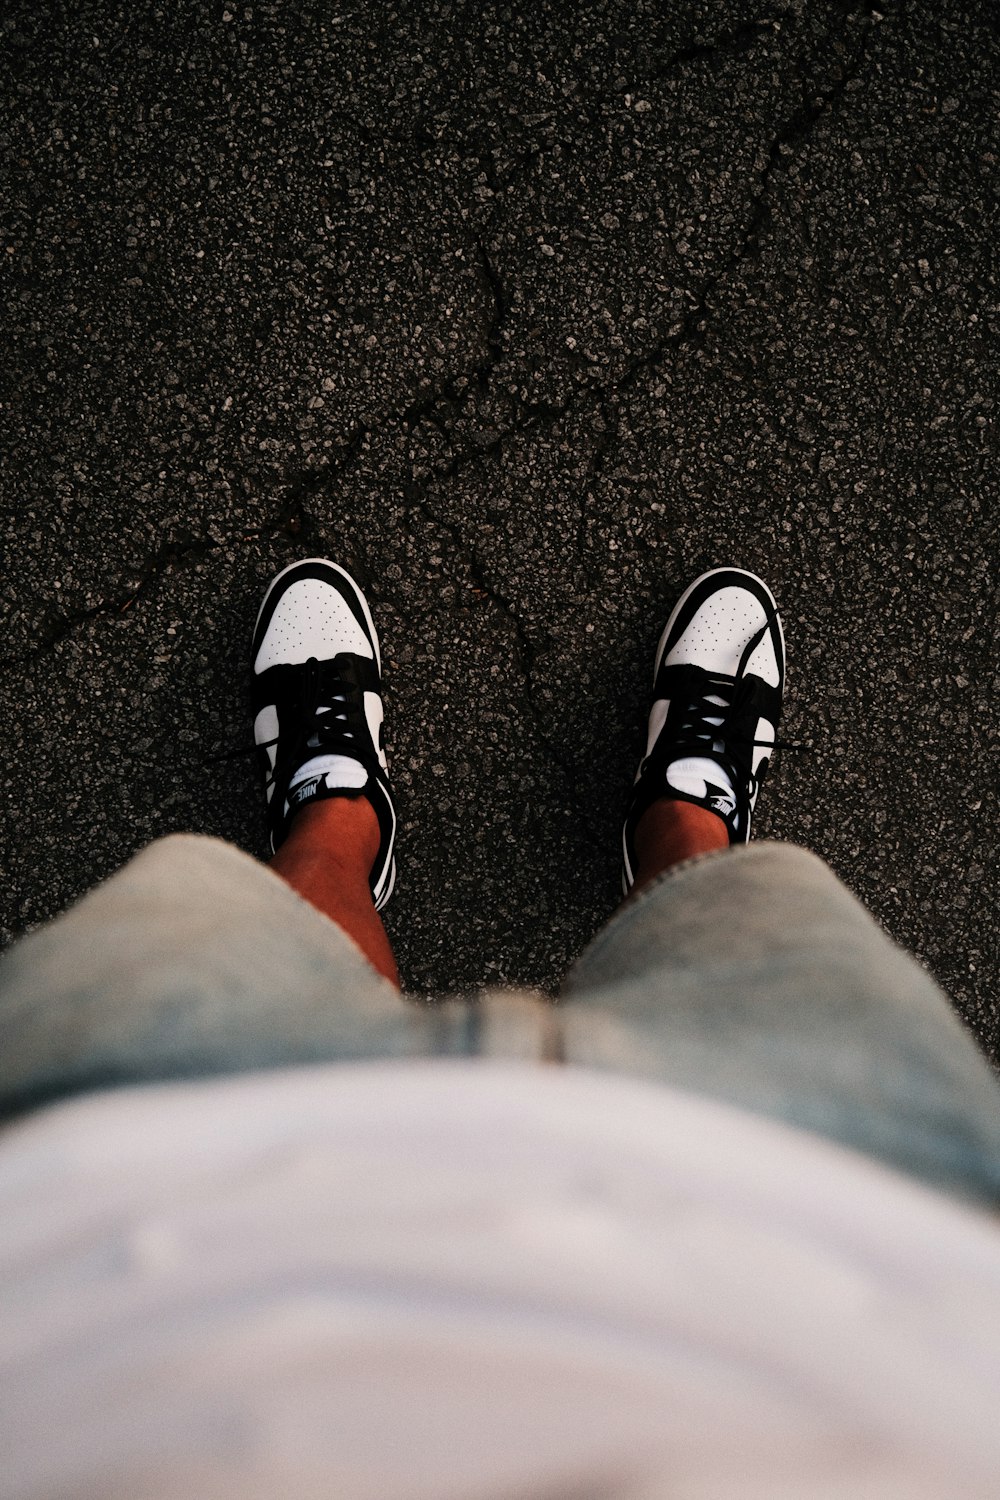 a person with black and white shoes standing on asphalt